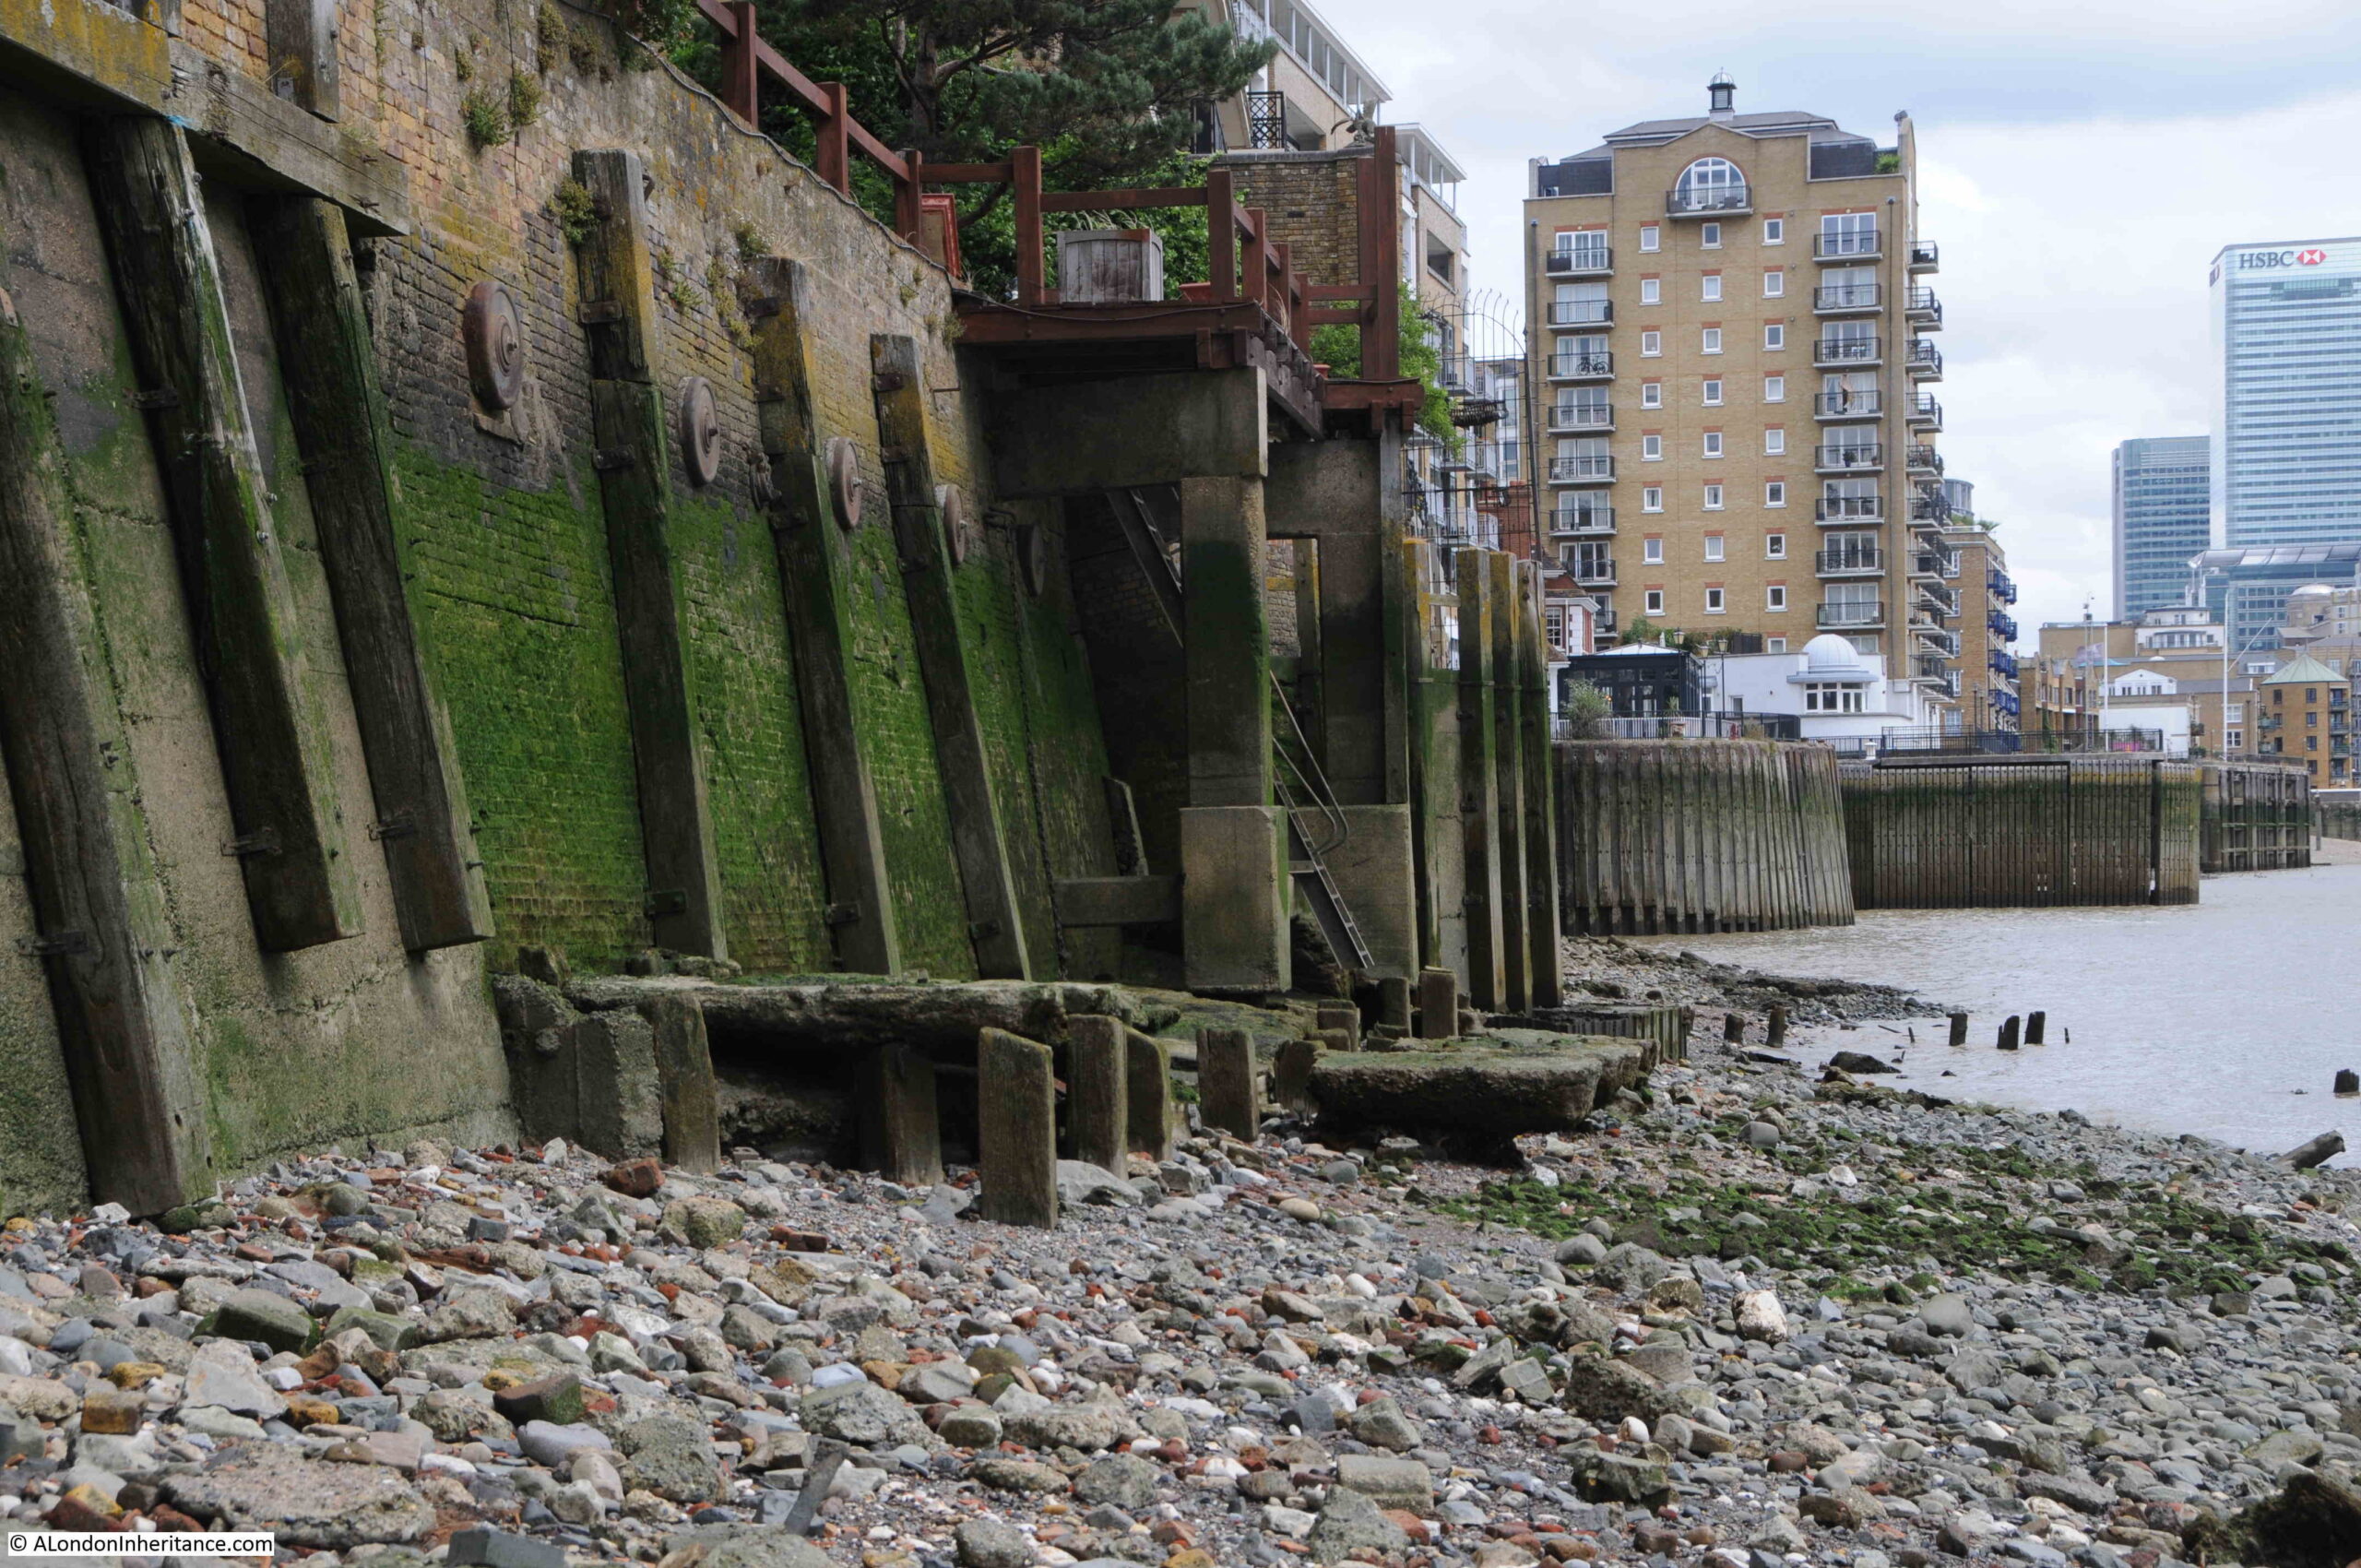 Remains of a Thames jetty